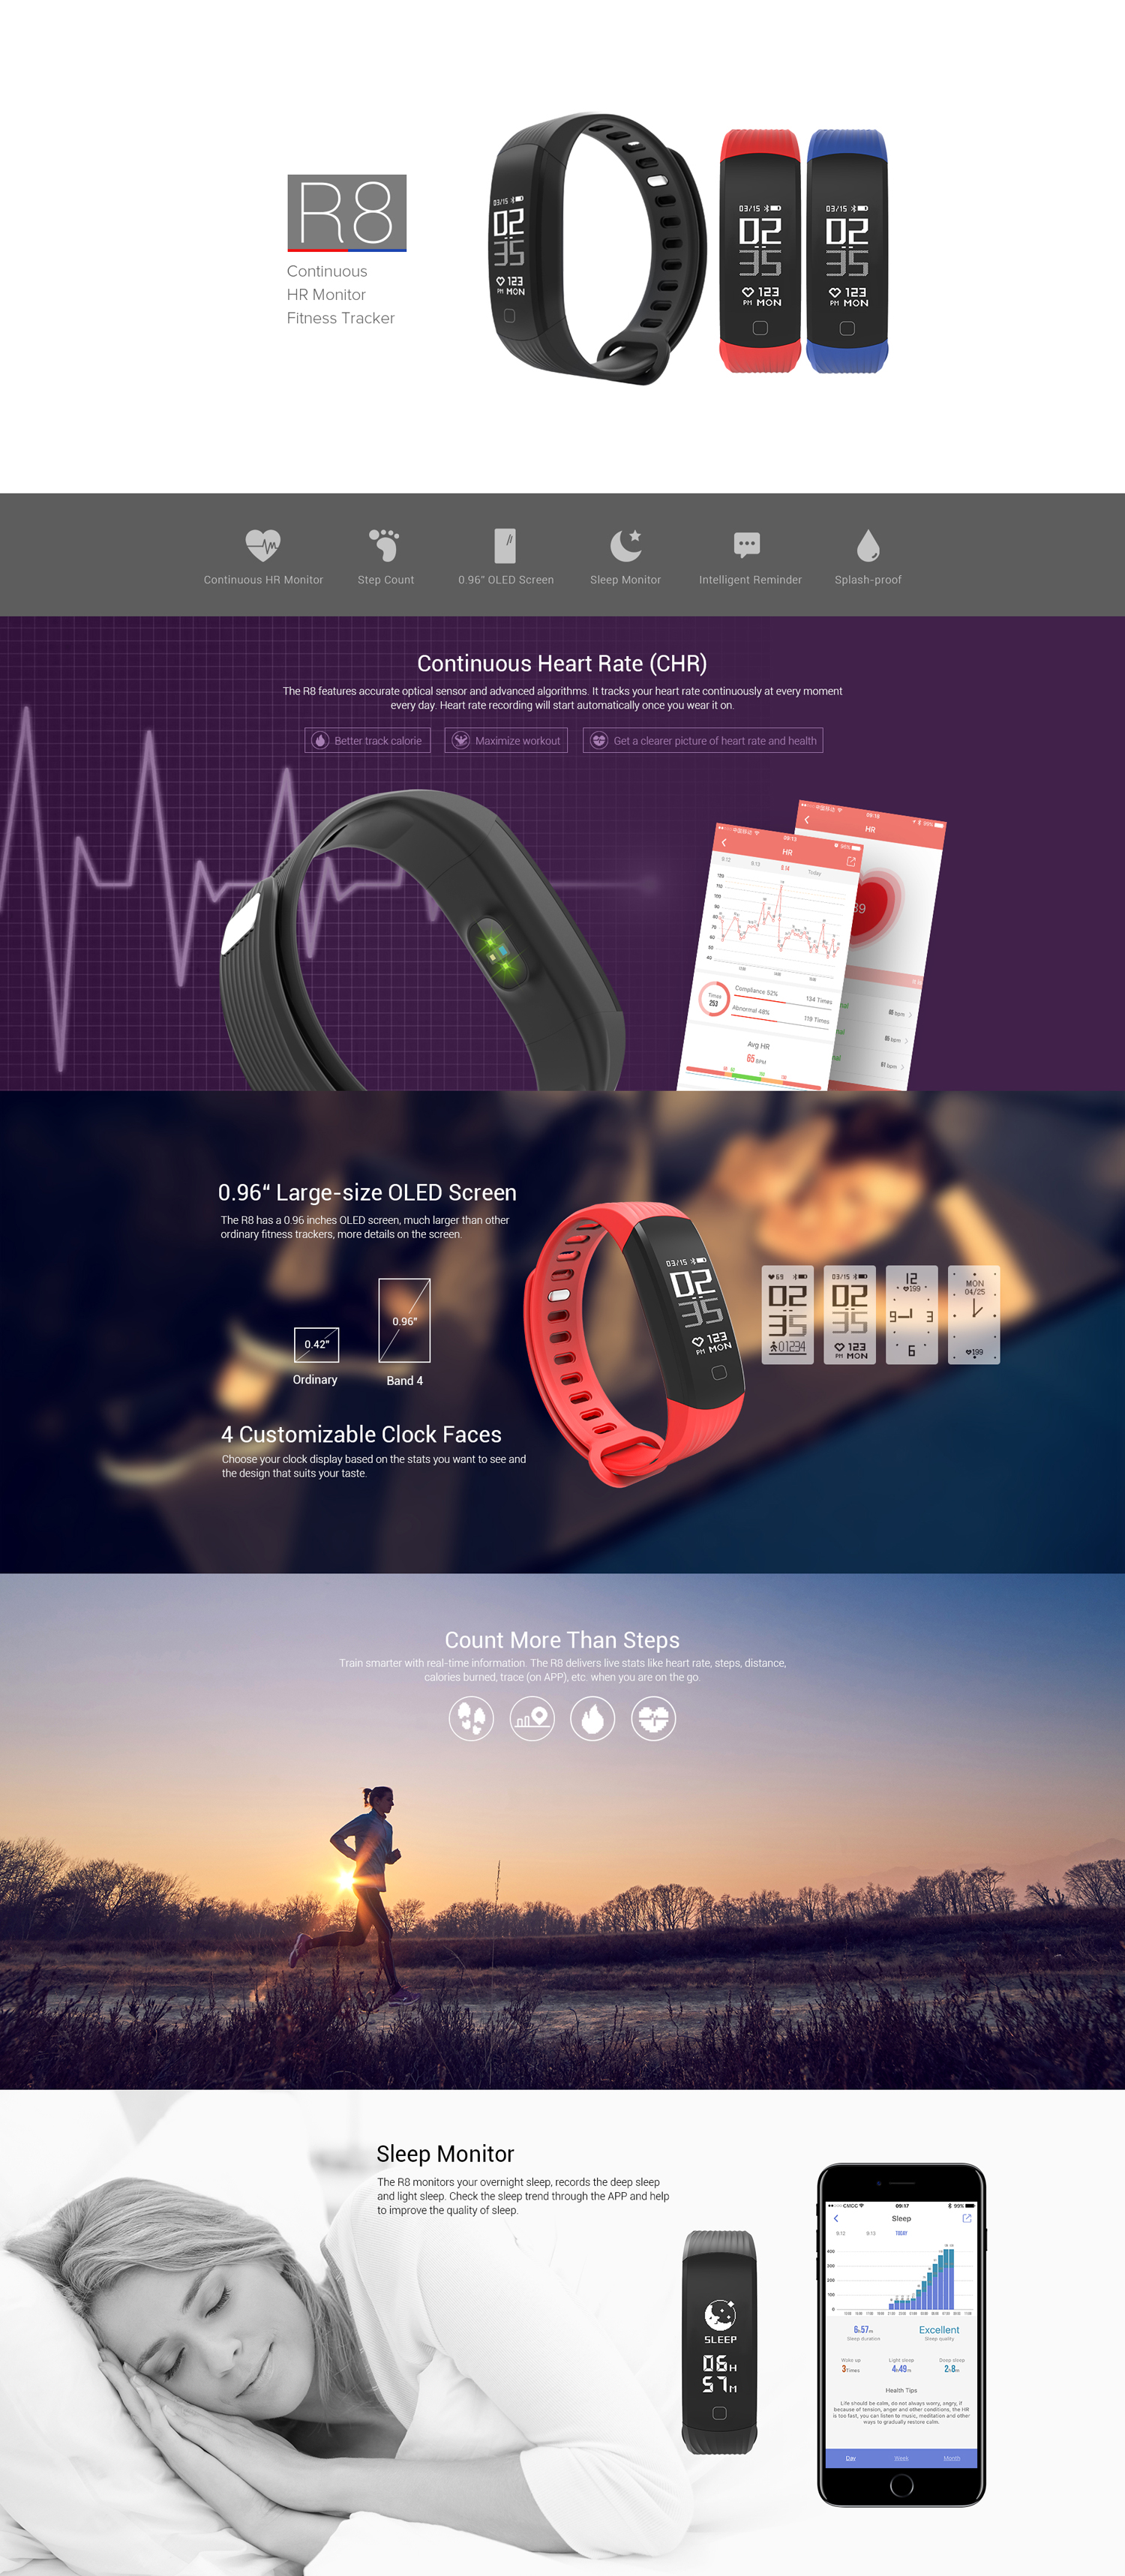 R8-Continuous-Heart-Rate-Monitor-Sport-Tracker-IP68-Waterproof-Smart-Watch-1247669